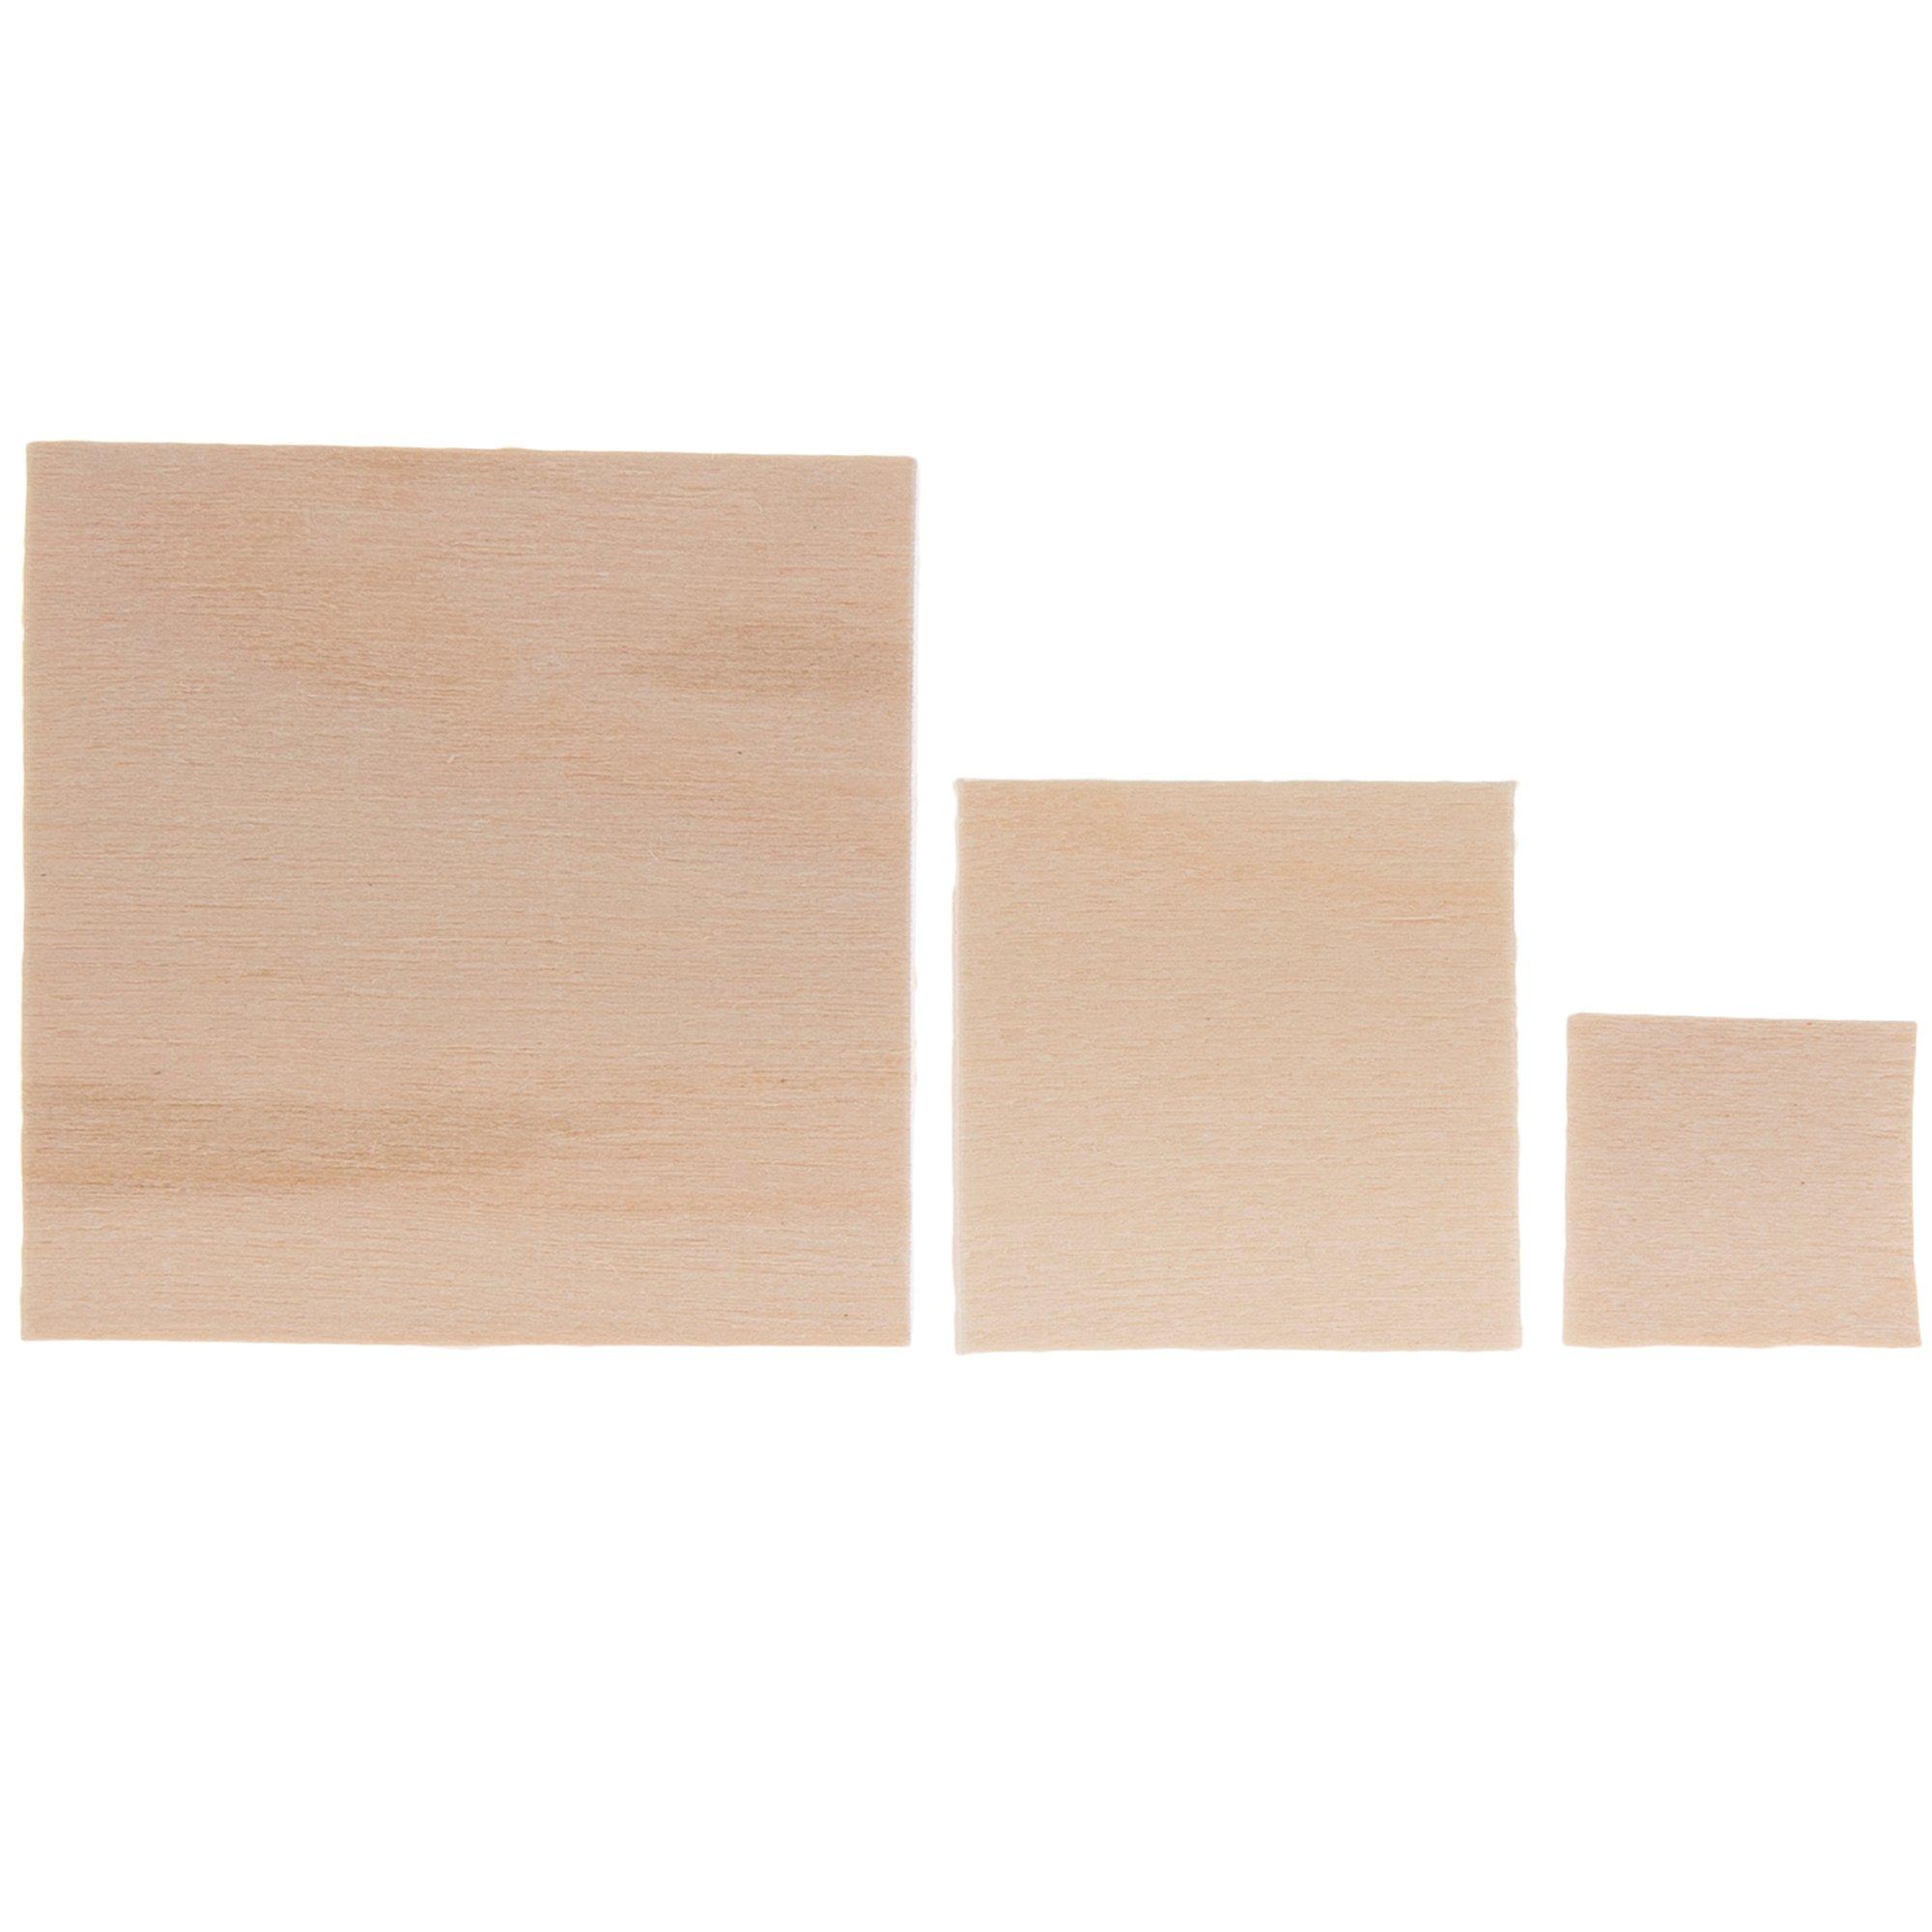 50 Pcs Small Plain Wooden Cubes, Wood Square Blocks for Crafts, DIY  Projects, 1, PACK - Kroger